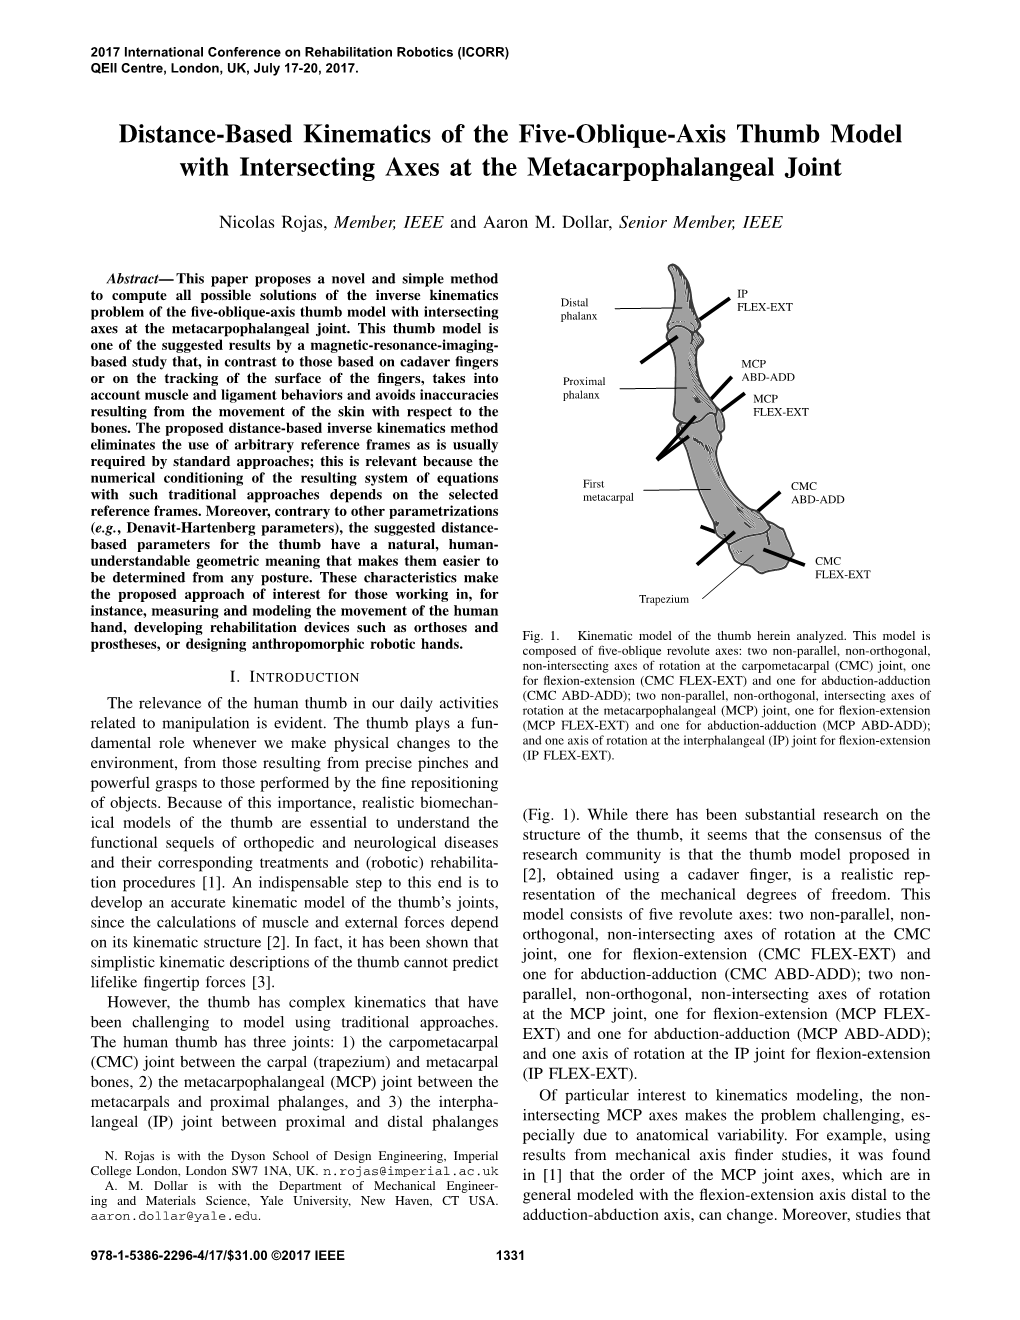 Distance-Based Kinematics of the Five-Oblique-Axis Thumb Model with Intersecting Axes at the Metacarpophalangeal Joint